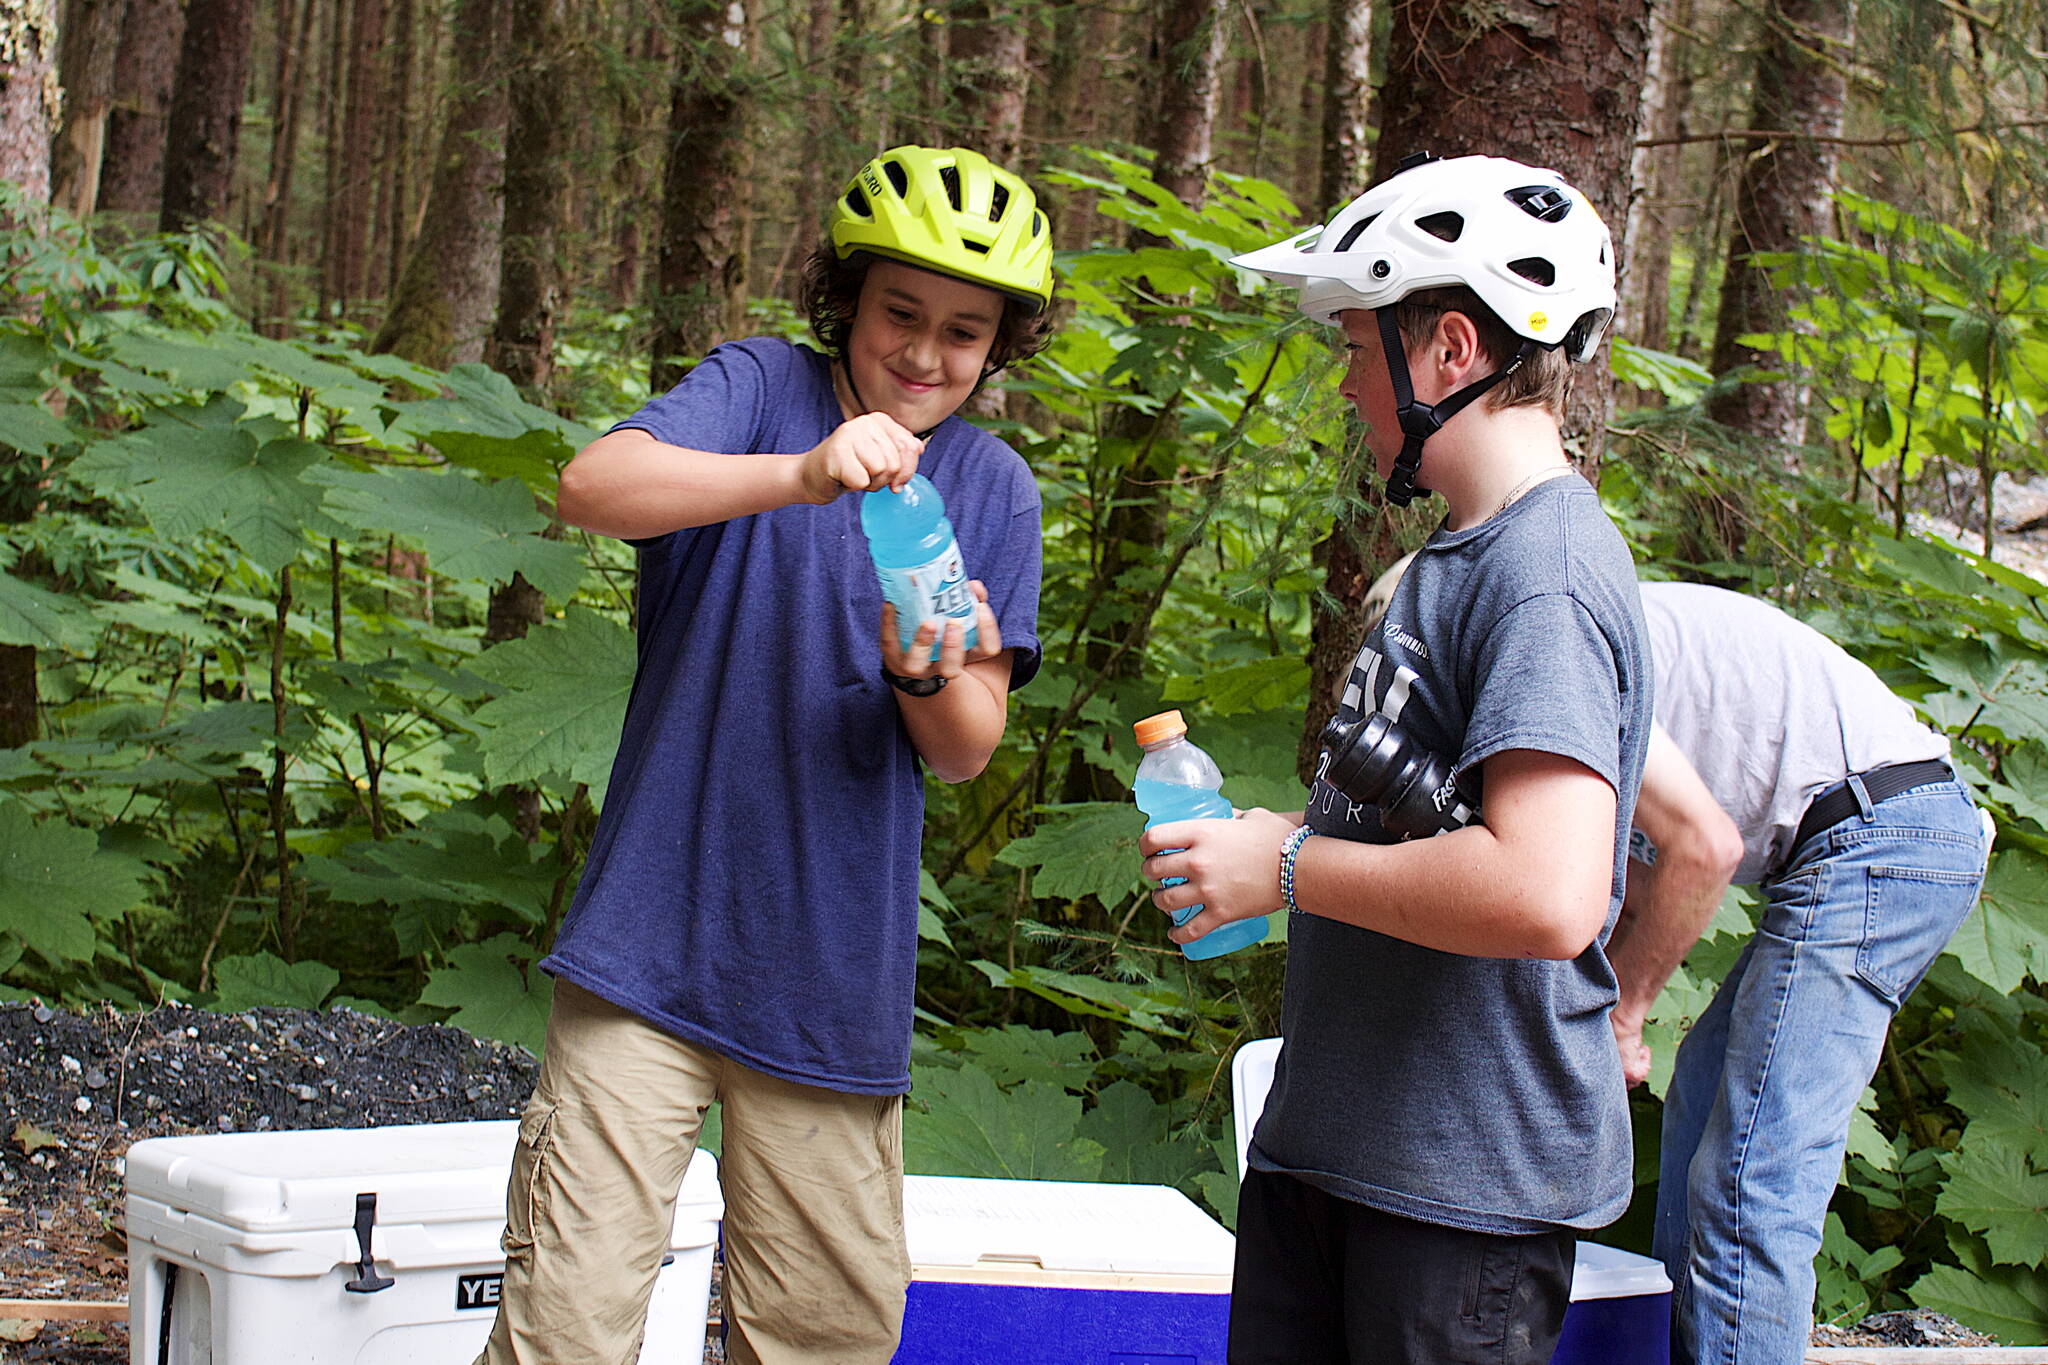 Bay White (left) and Reid Graham, both 13, take a break while volunteering to work on the nearly completed Thunder Mountain Bike Park on Saturday. Both said they are experienced riders who frequent other mountain bike trails in Juneau. (Mark Sabbatini / Juneau Empire)